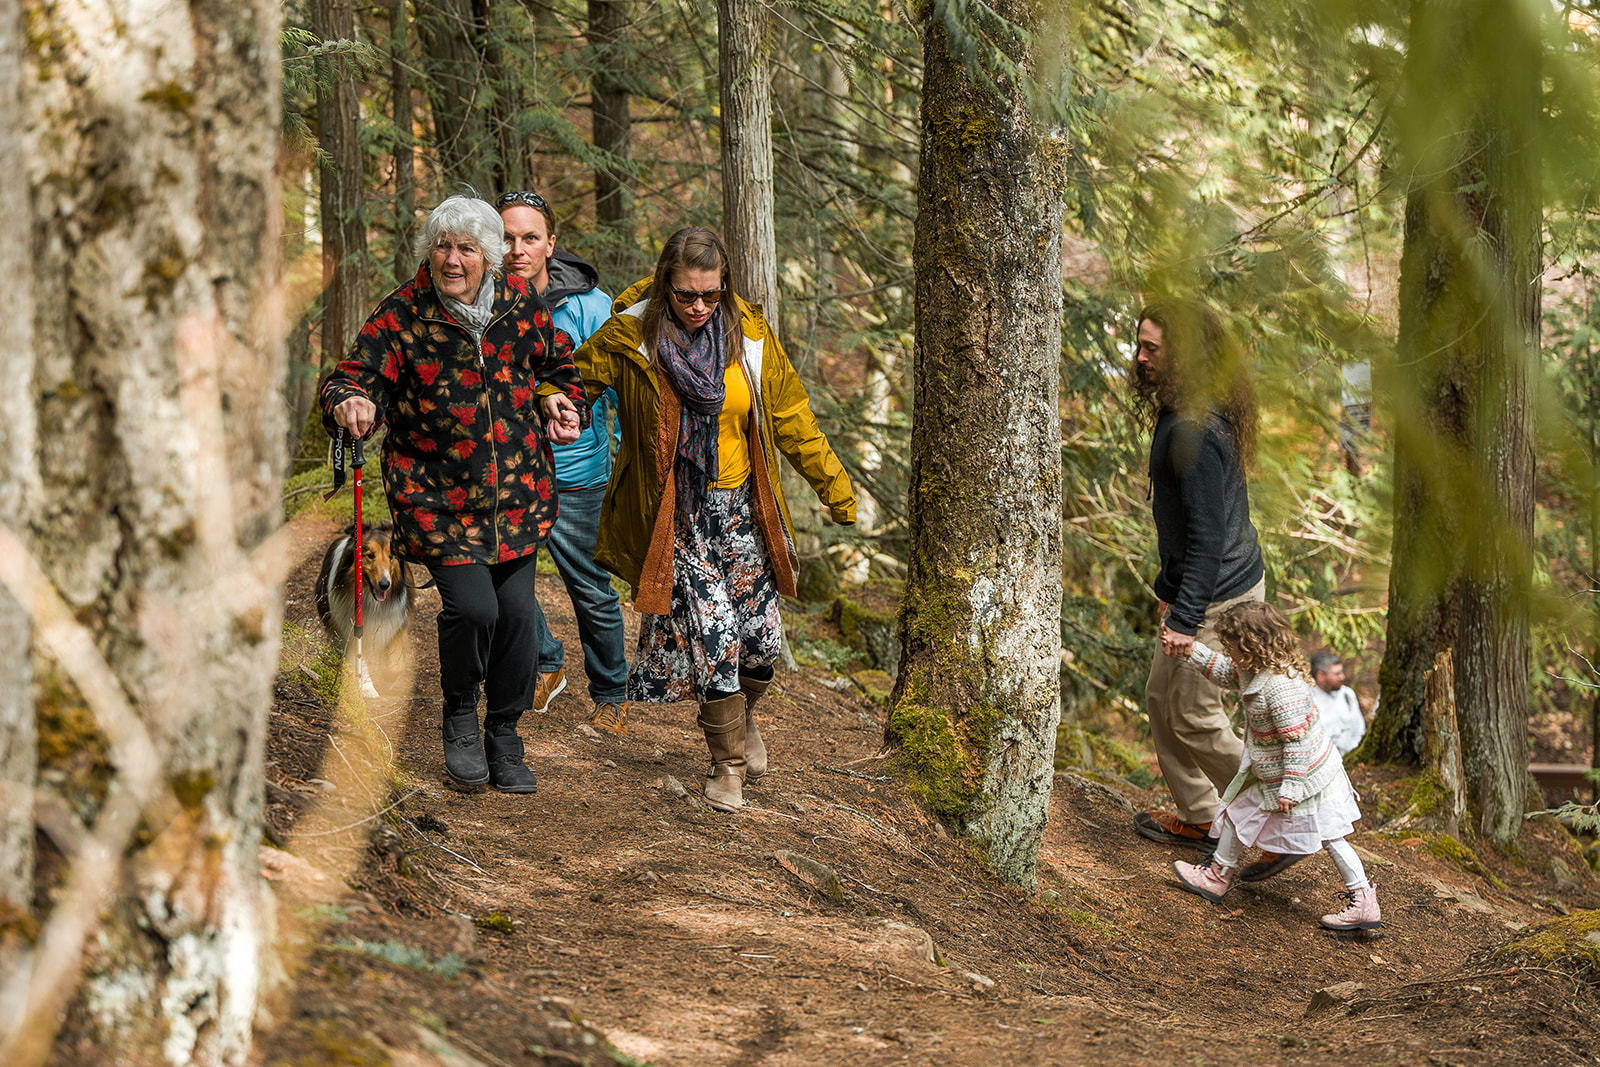 Grandma makes her way up the forest path